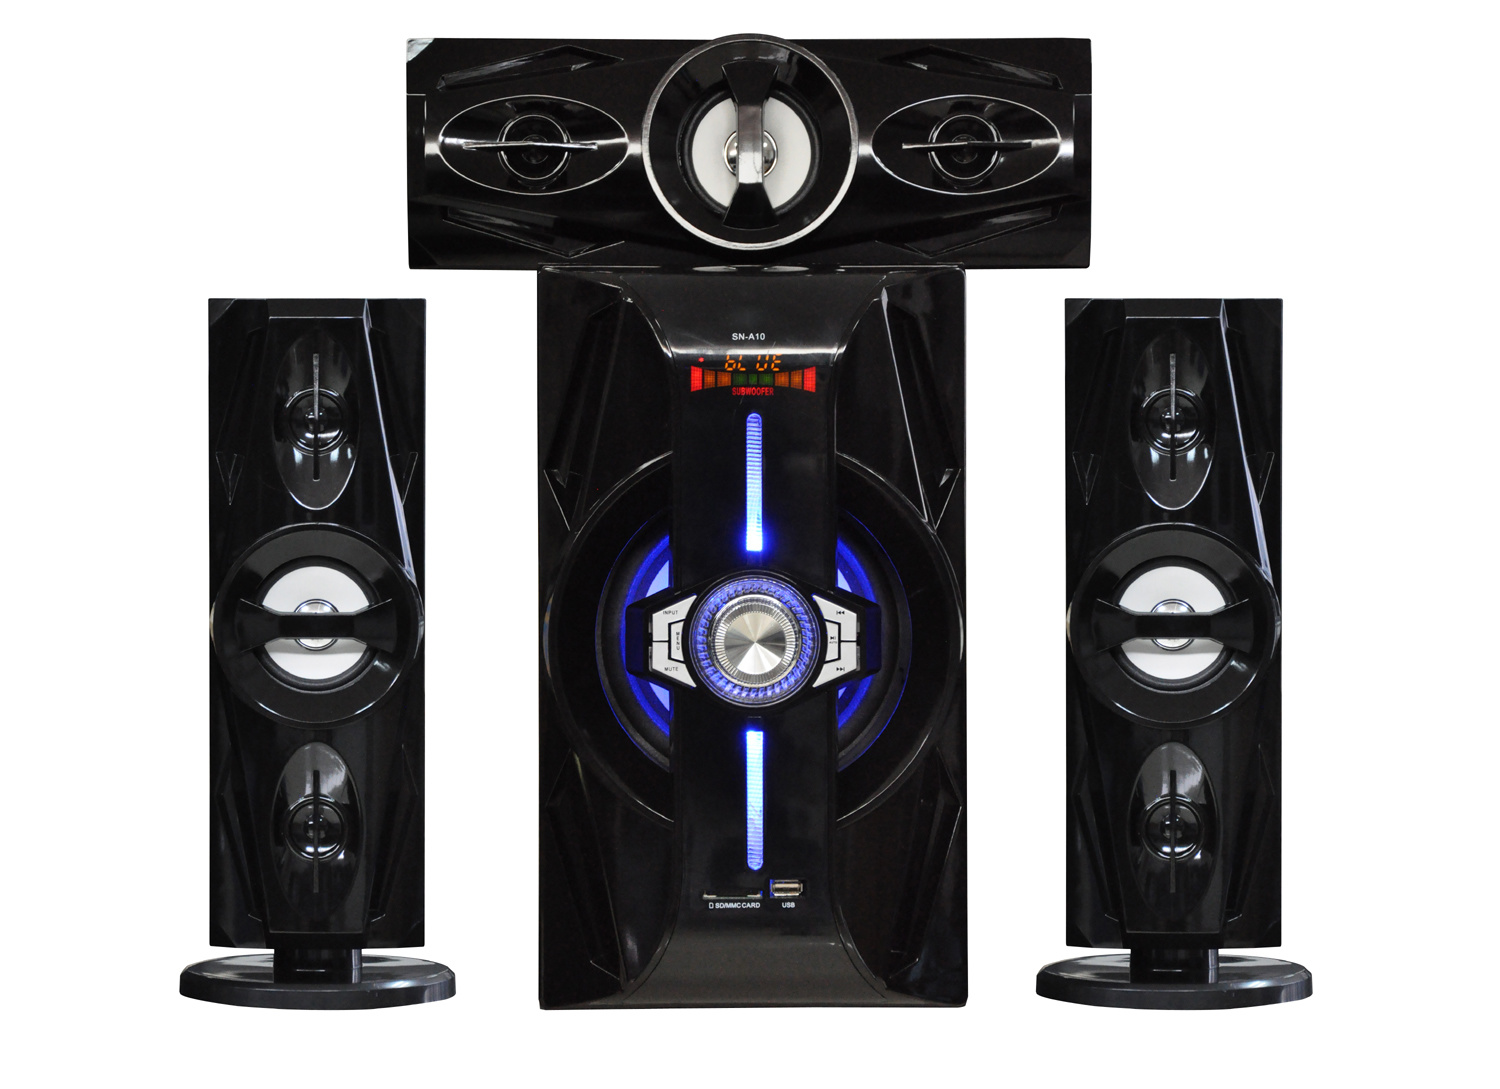 Multimedia Audio 3.1 Home Theater Speaker with Bluetooth